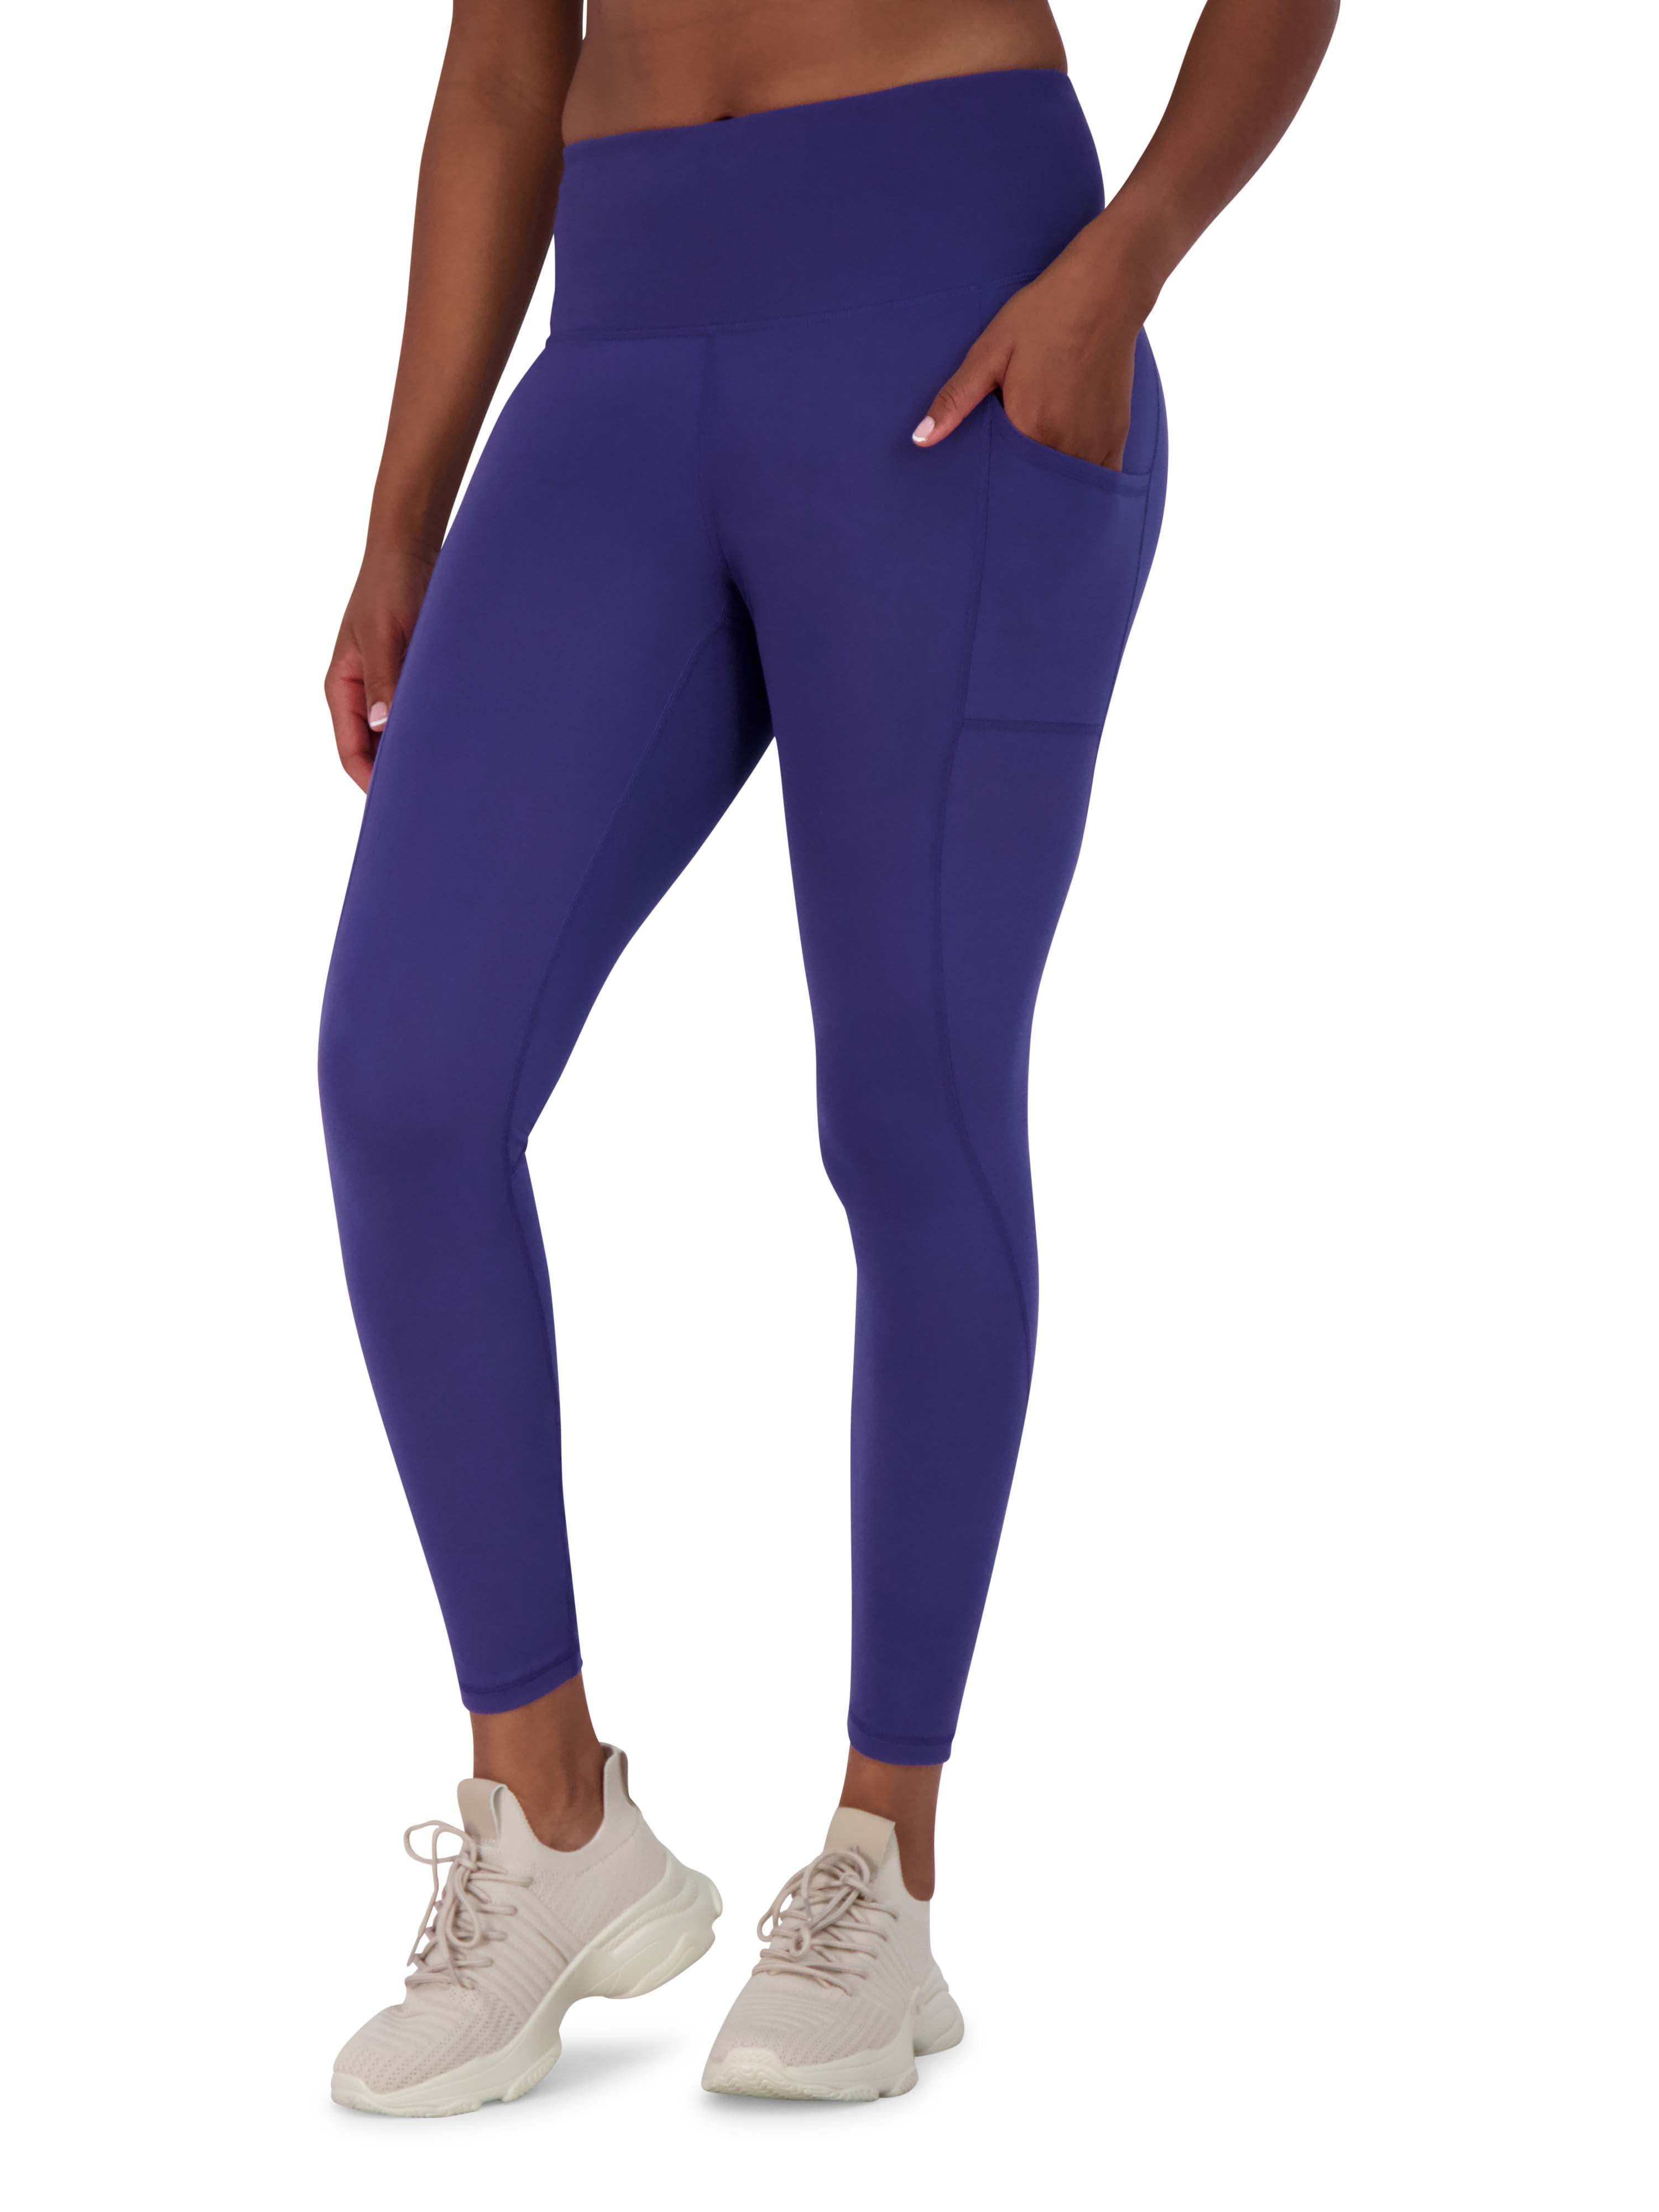 Fast and Free High-Rise Tight 25” Pockets *Updated - Lululemon